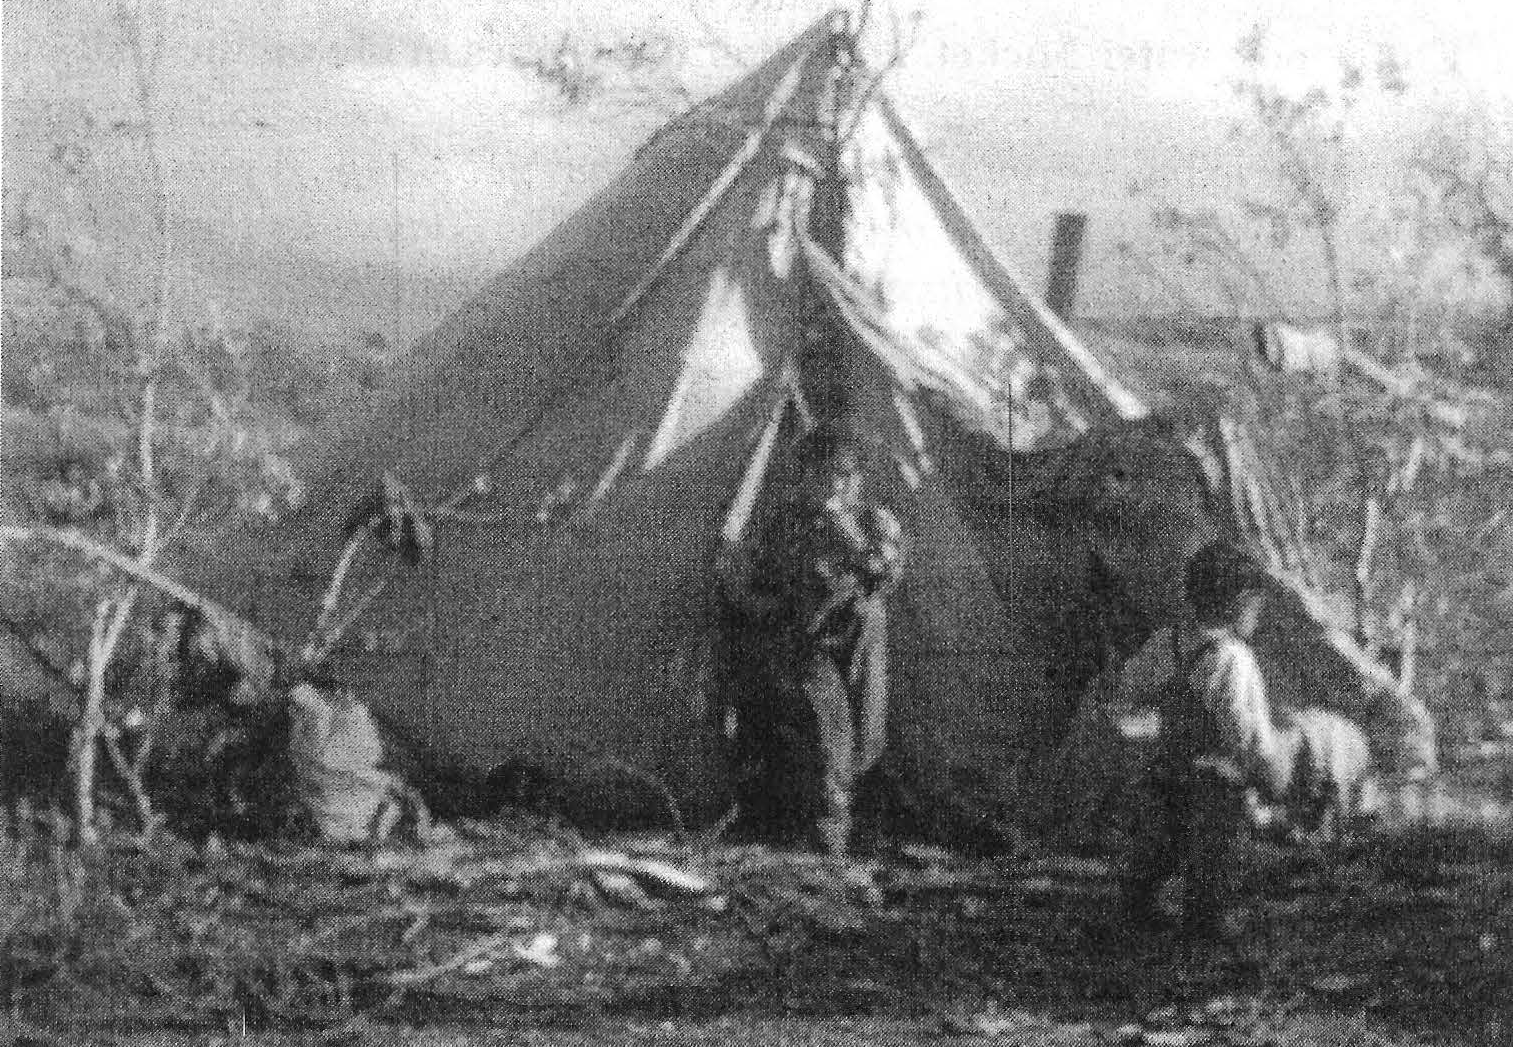 Black-and-white photograph of Nunamiut children and a wall tent on the tundra